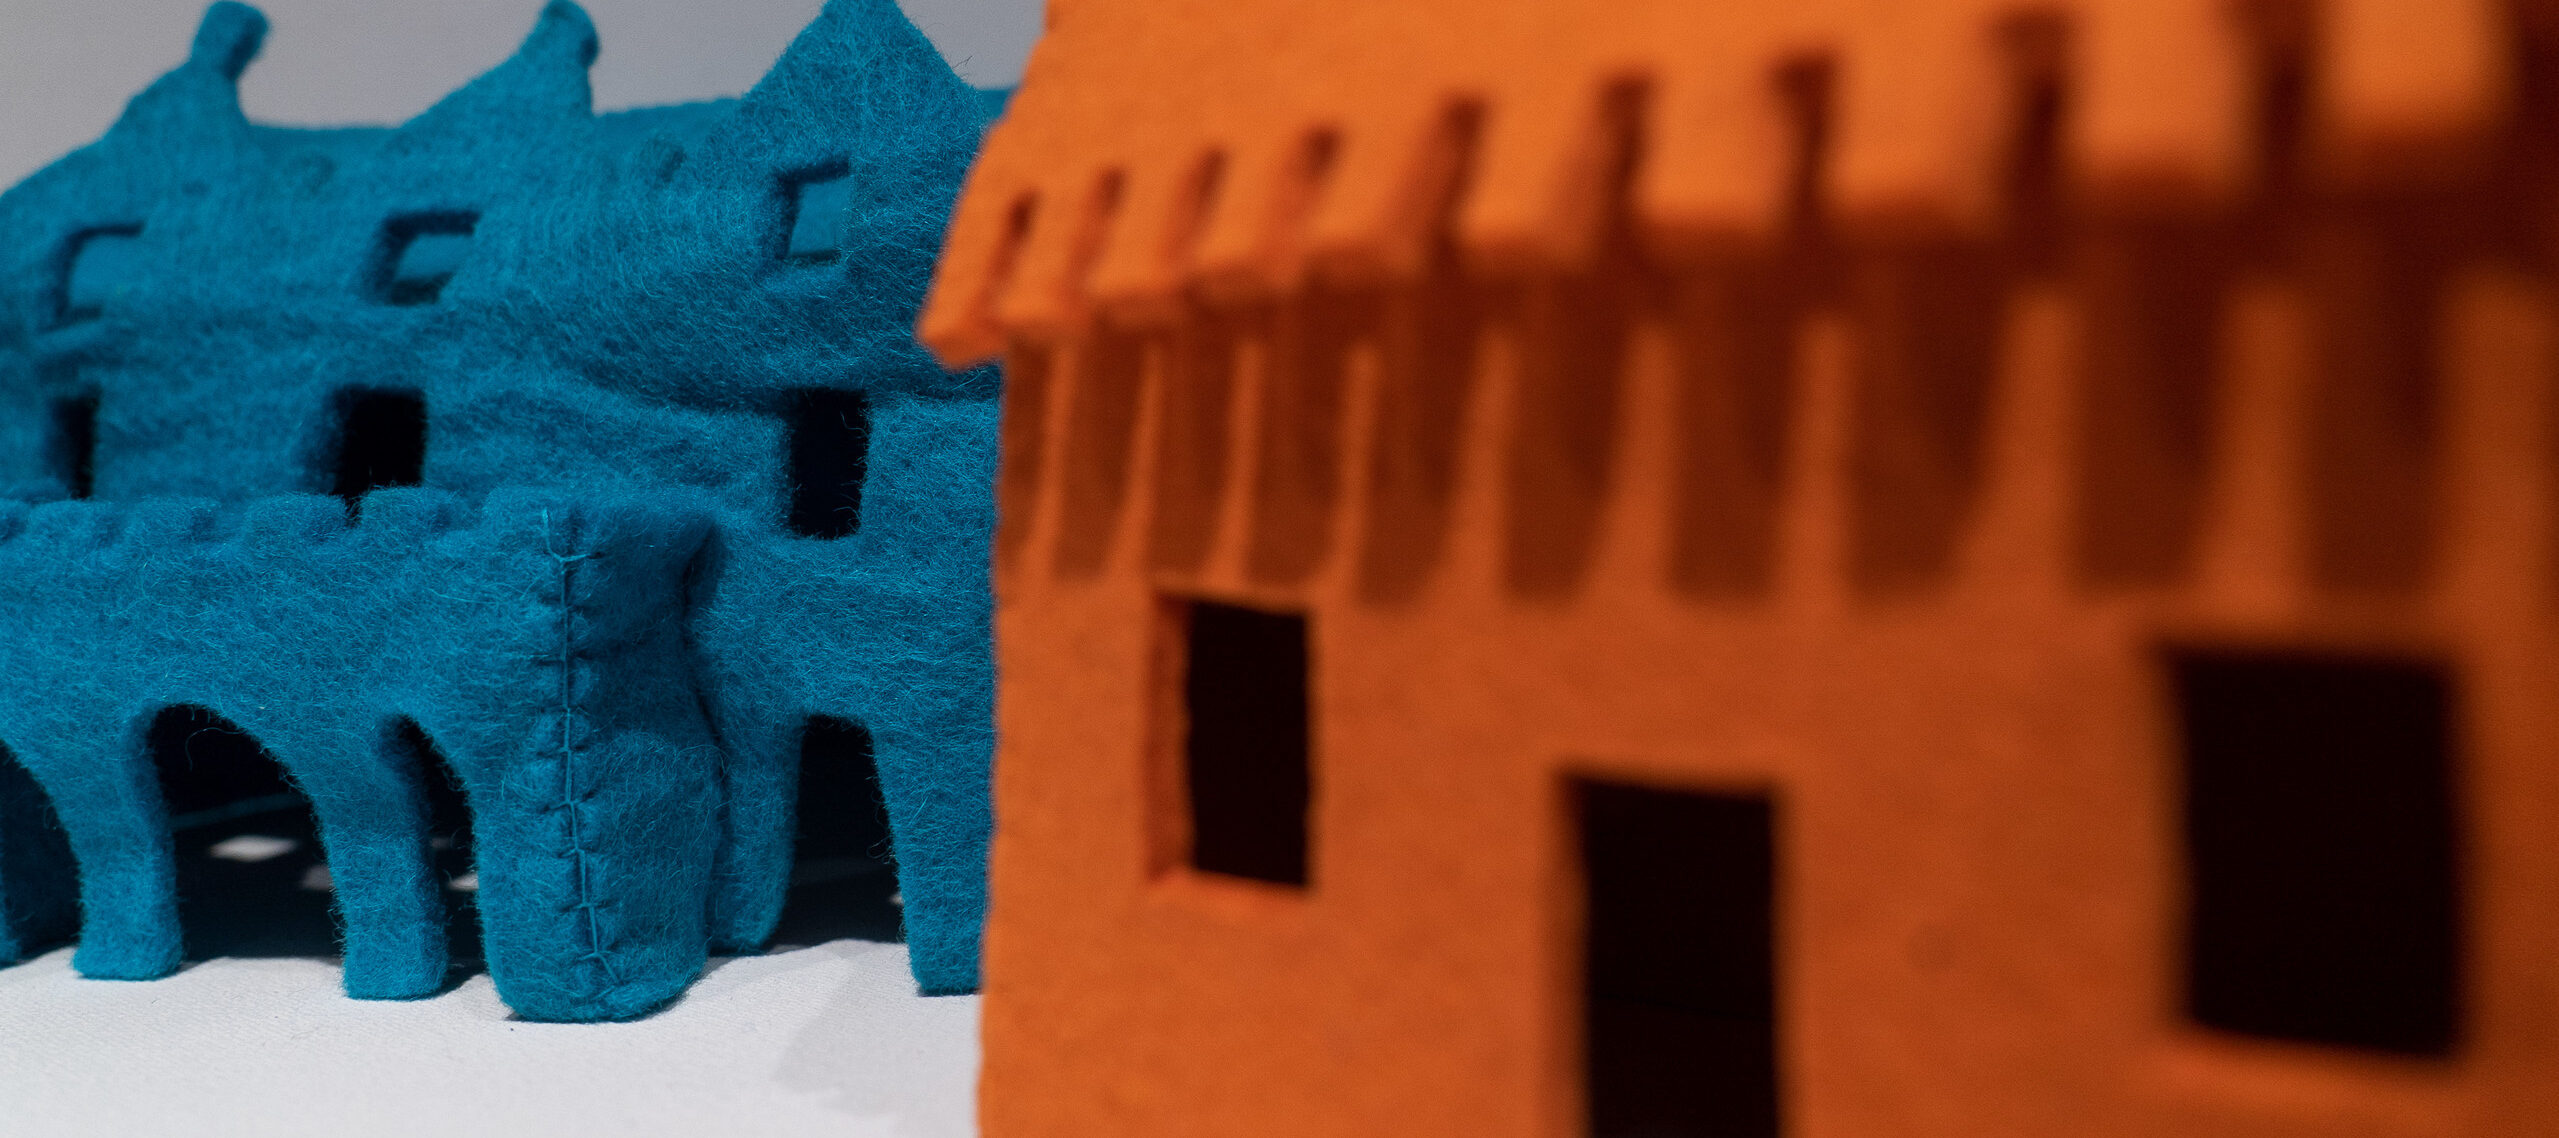 Close-up detail of a larger artwork features a view of two felt houses. On the viewer's right is an orange house that is out-of-focus while on the left is a blue house that is in-focus and has visible stitches, coarse texture, and rectangular windows.